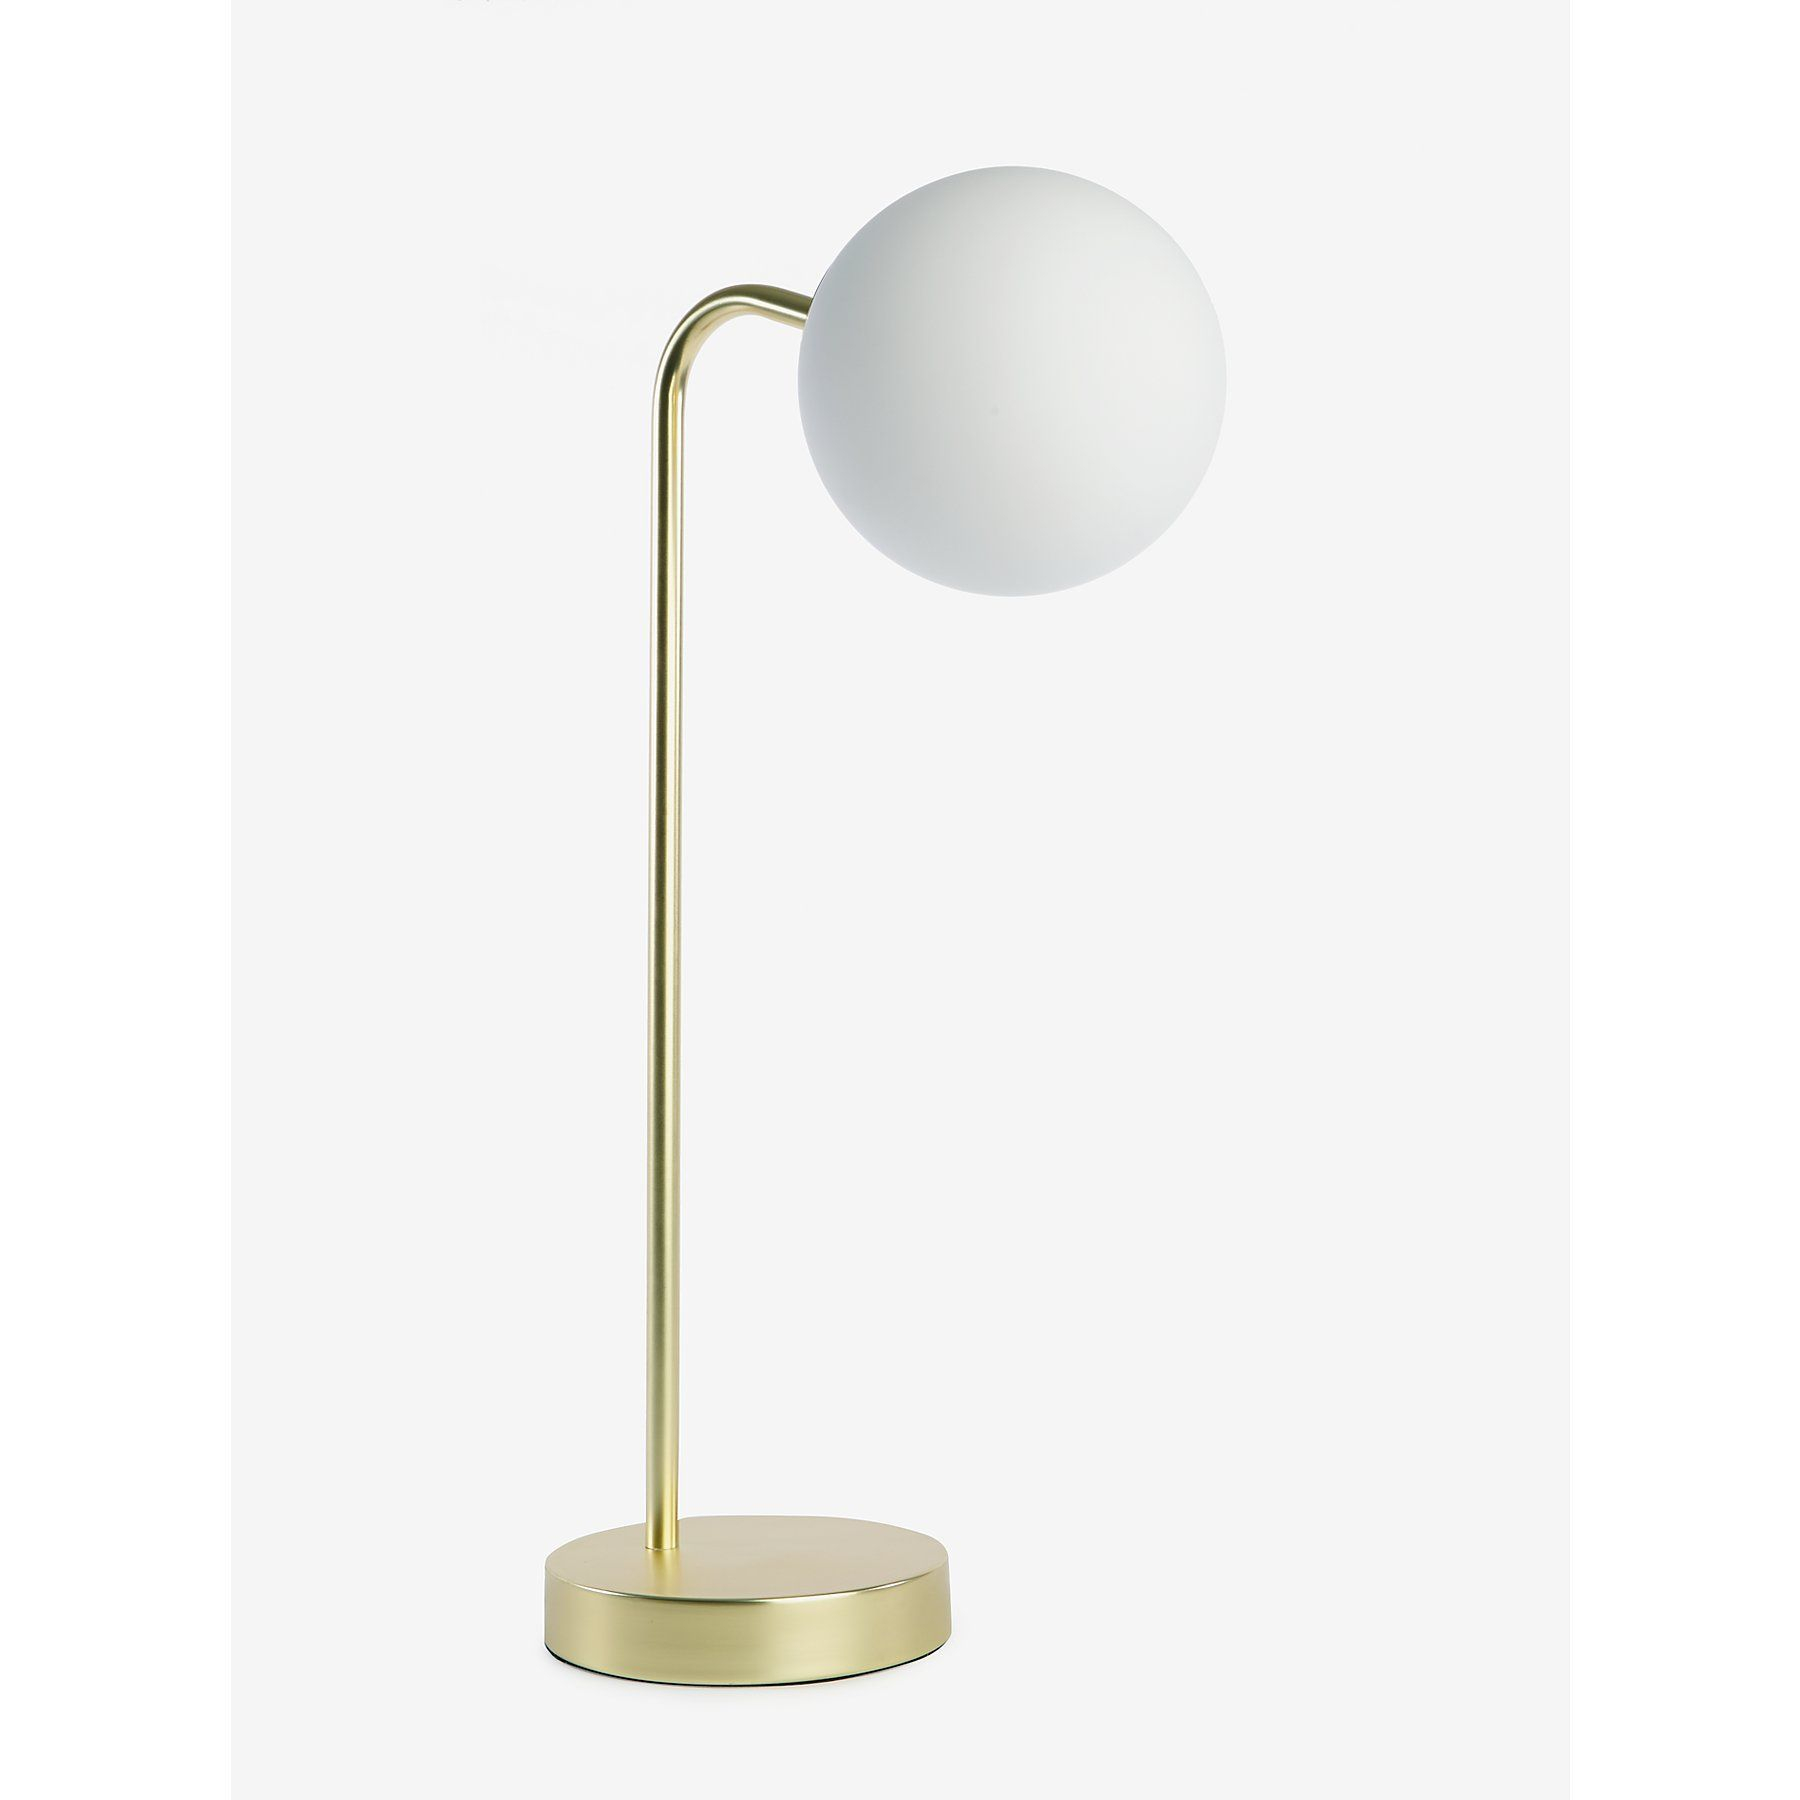 Gold Effect Curved Desk Lamp In 2019 Living Room Curved regarding measurements 1800 X 1800